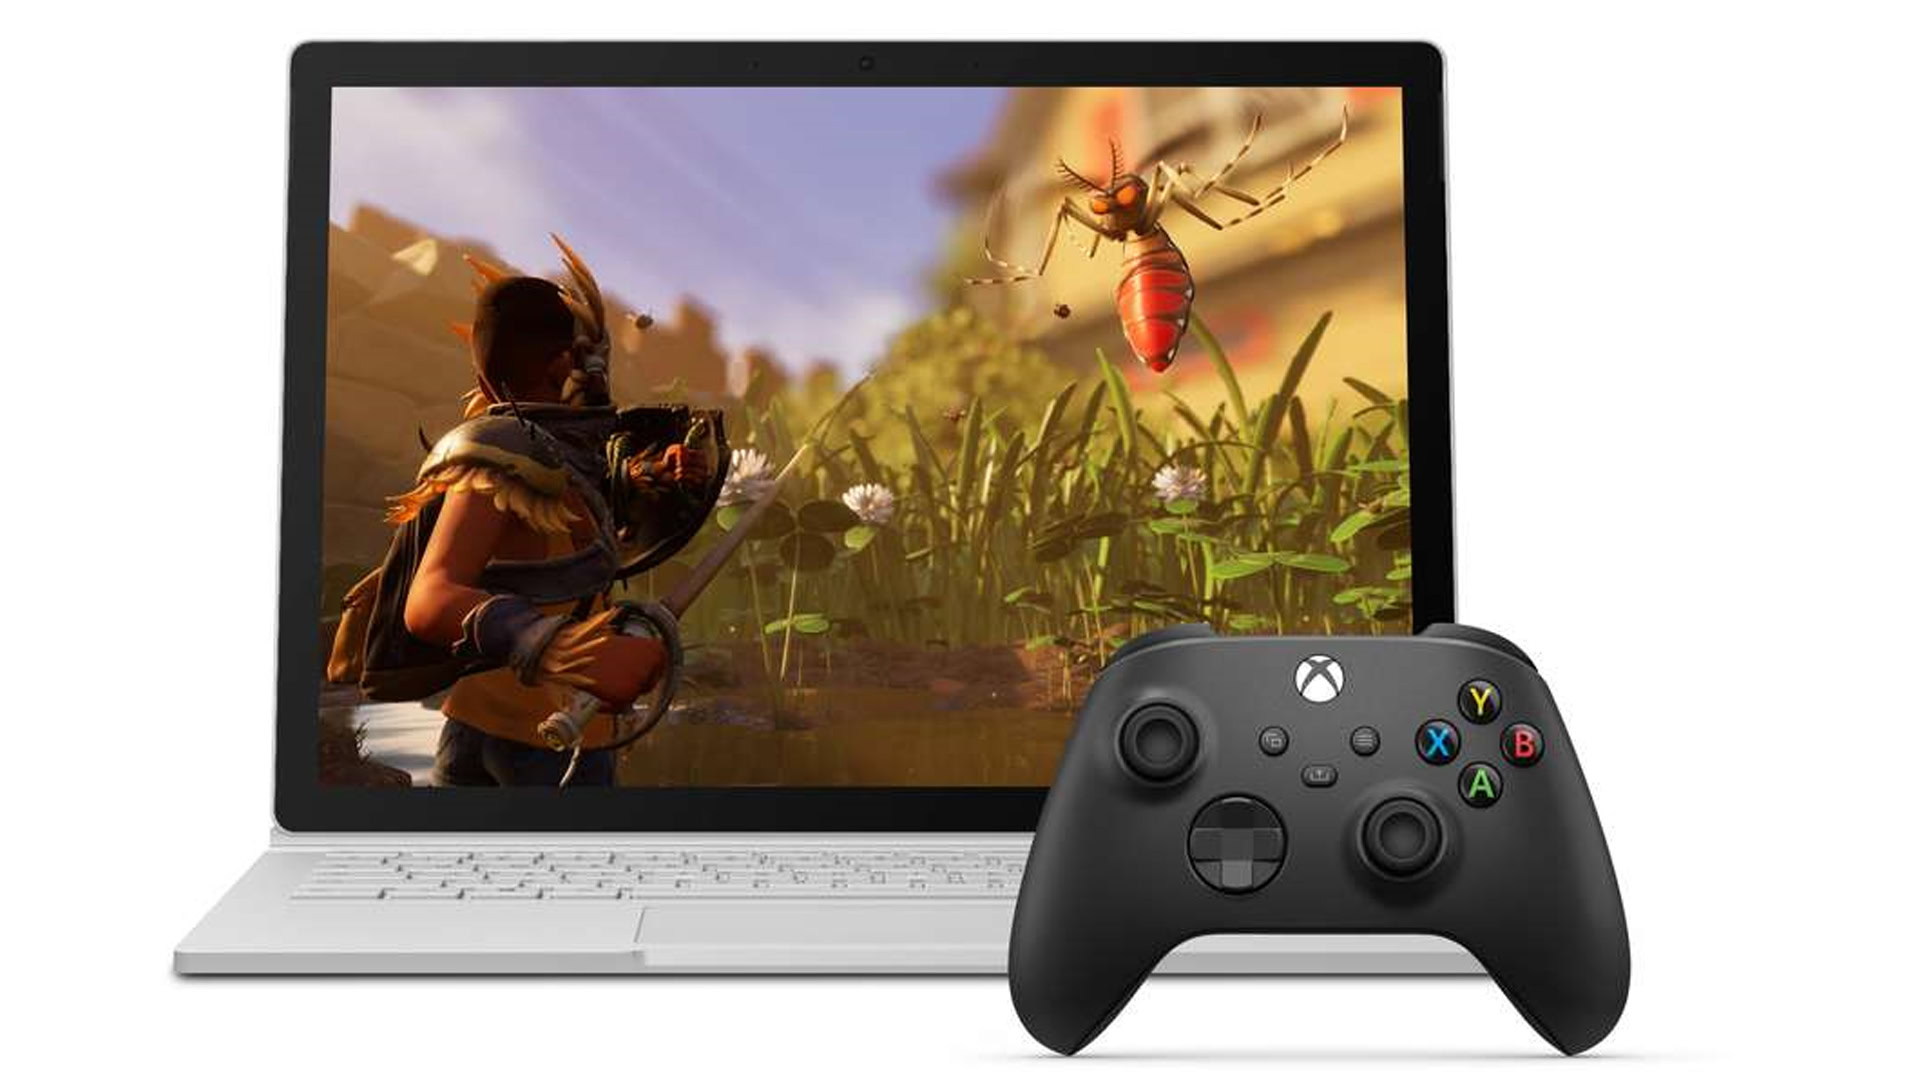 Xbox Cloud Gaming on a Microsoft Surface PC.